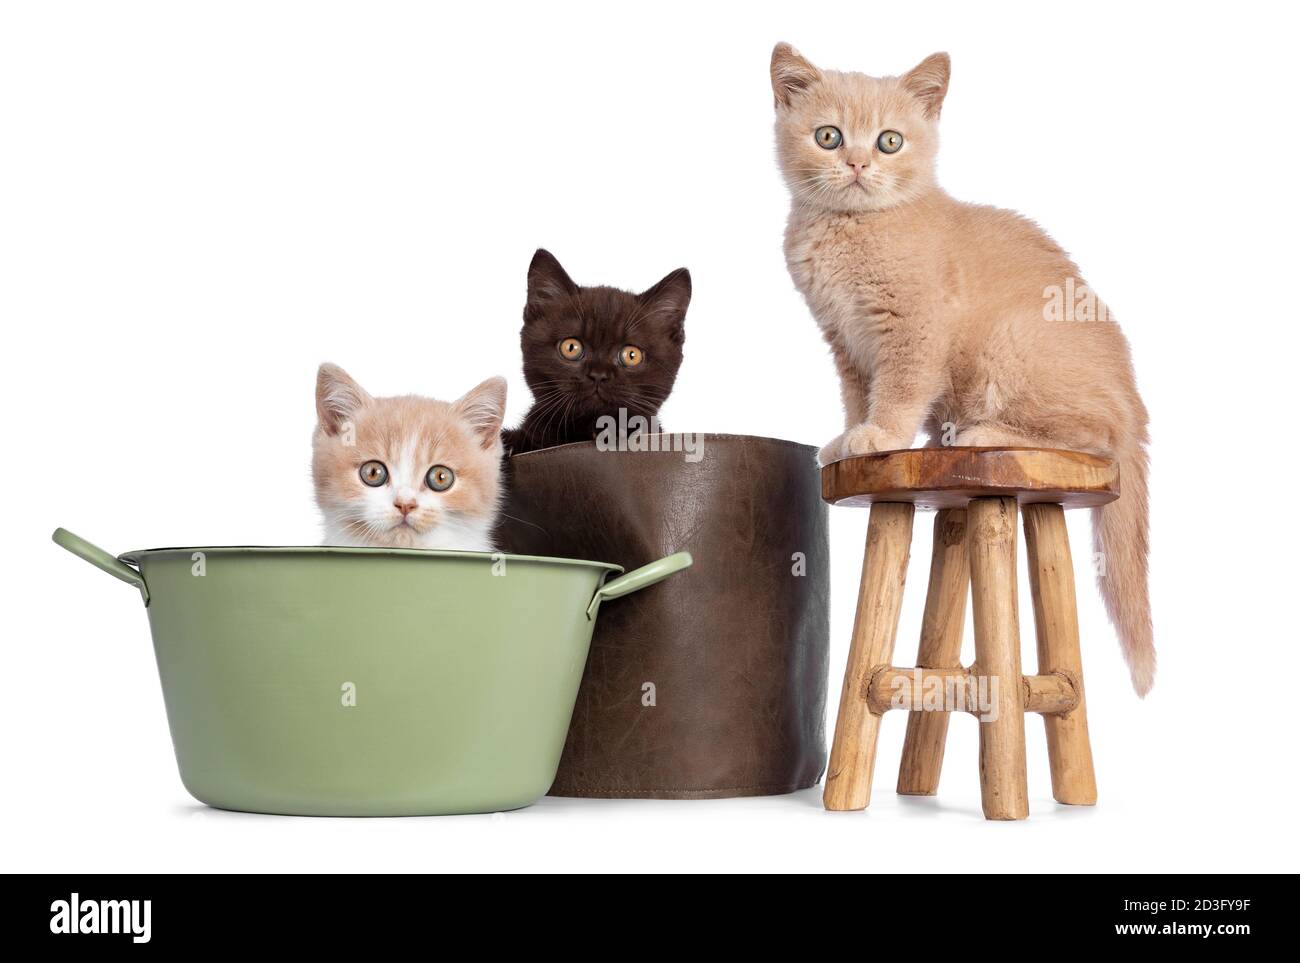 Cute trio of British Shorthair kittens in varied colors, sitting on and in stool, basket and bucket. All looking towards camera. Isolated on white bac Stock Photo